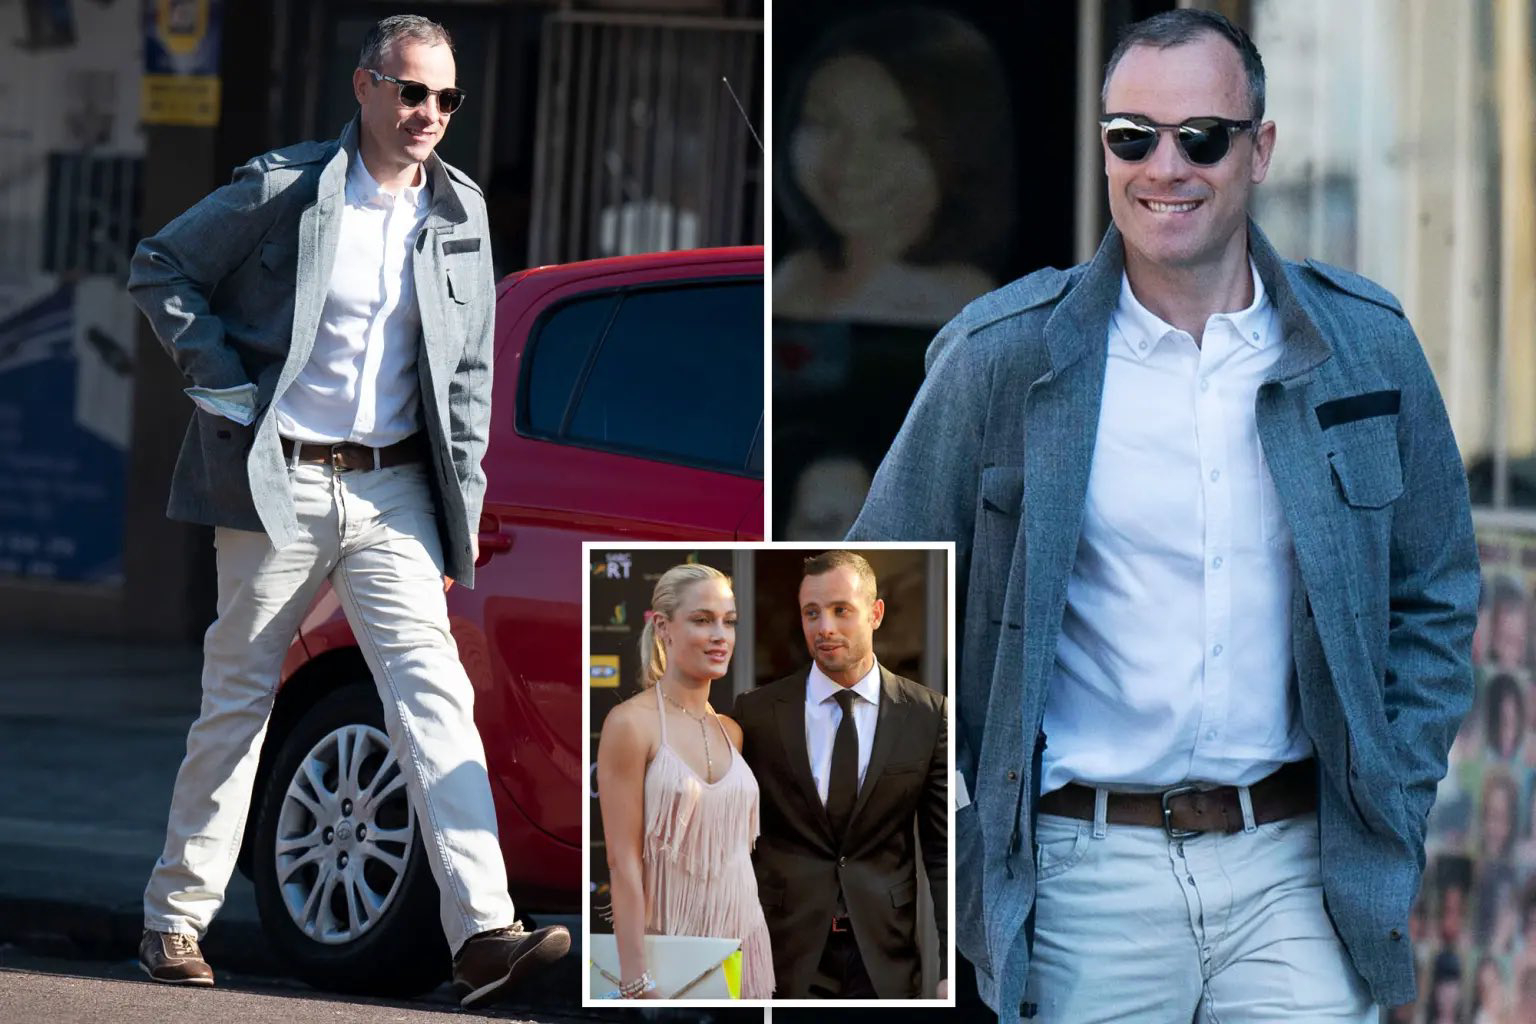 PHOTO Oscar Pistorius laughing in public while taking a walk